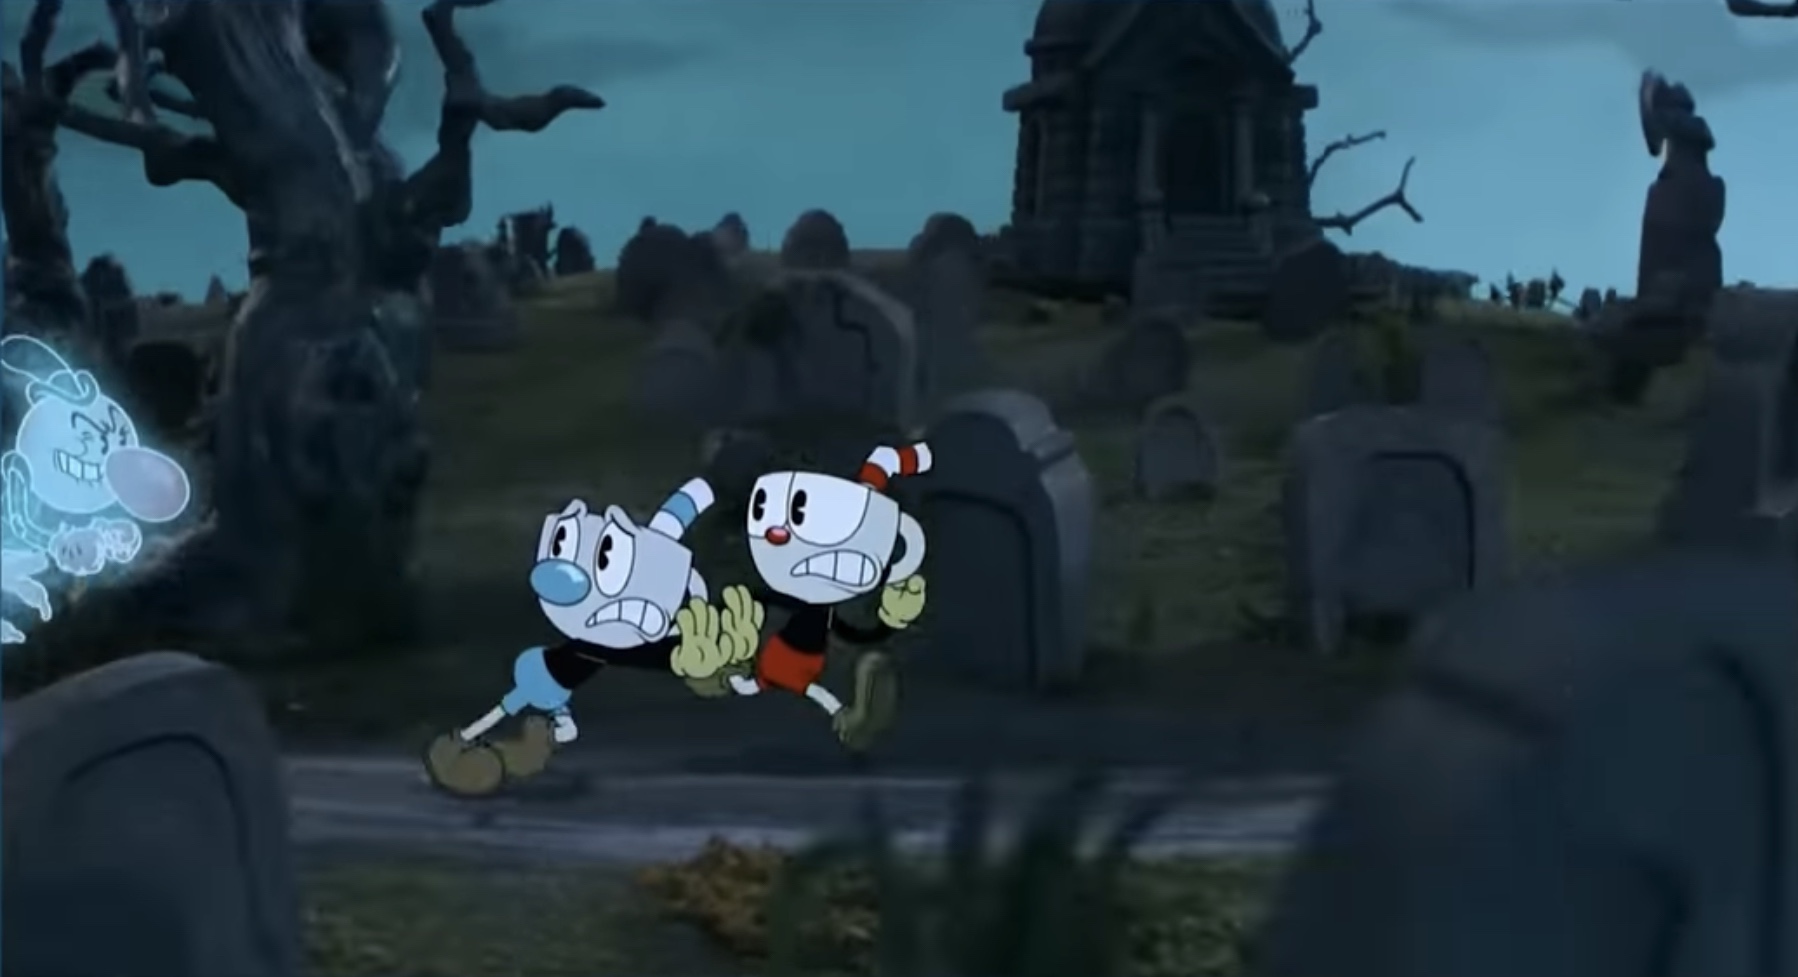 TV REVIEW] Cuphead game transformed as classic homage to cartoons